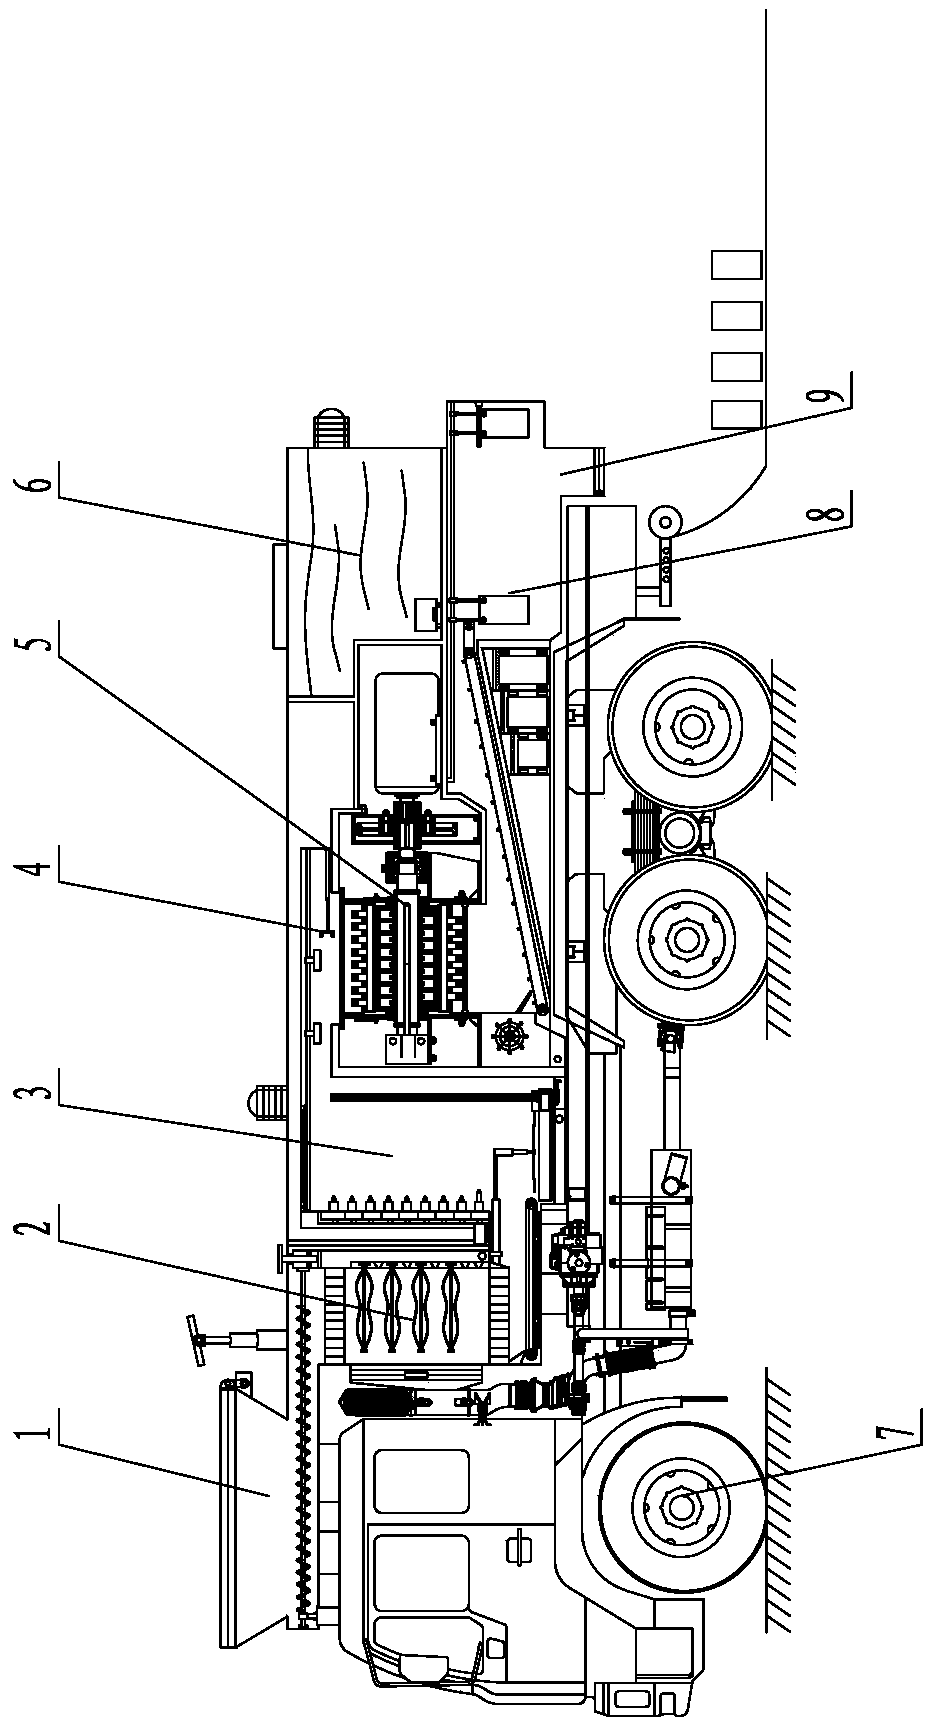 Vehicle agricultural grain packaging apparatus